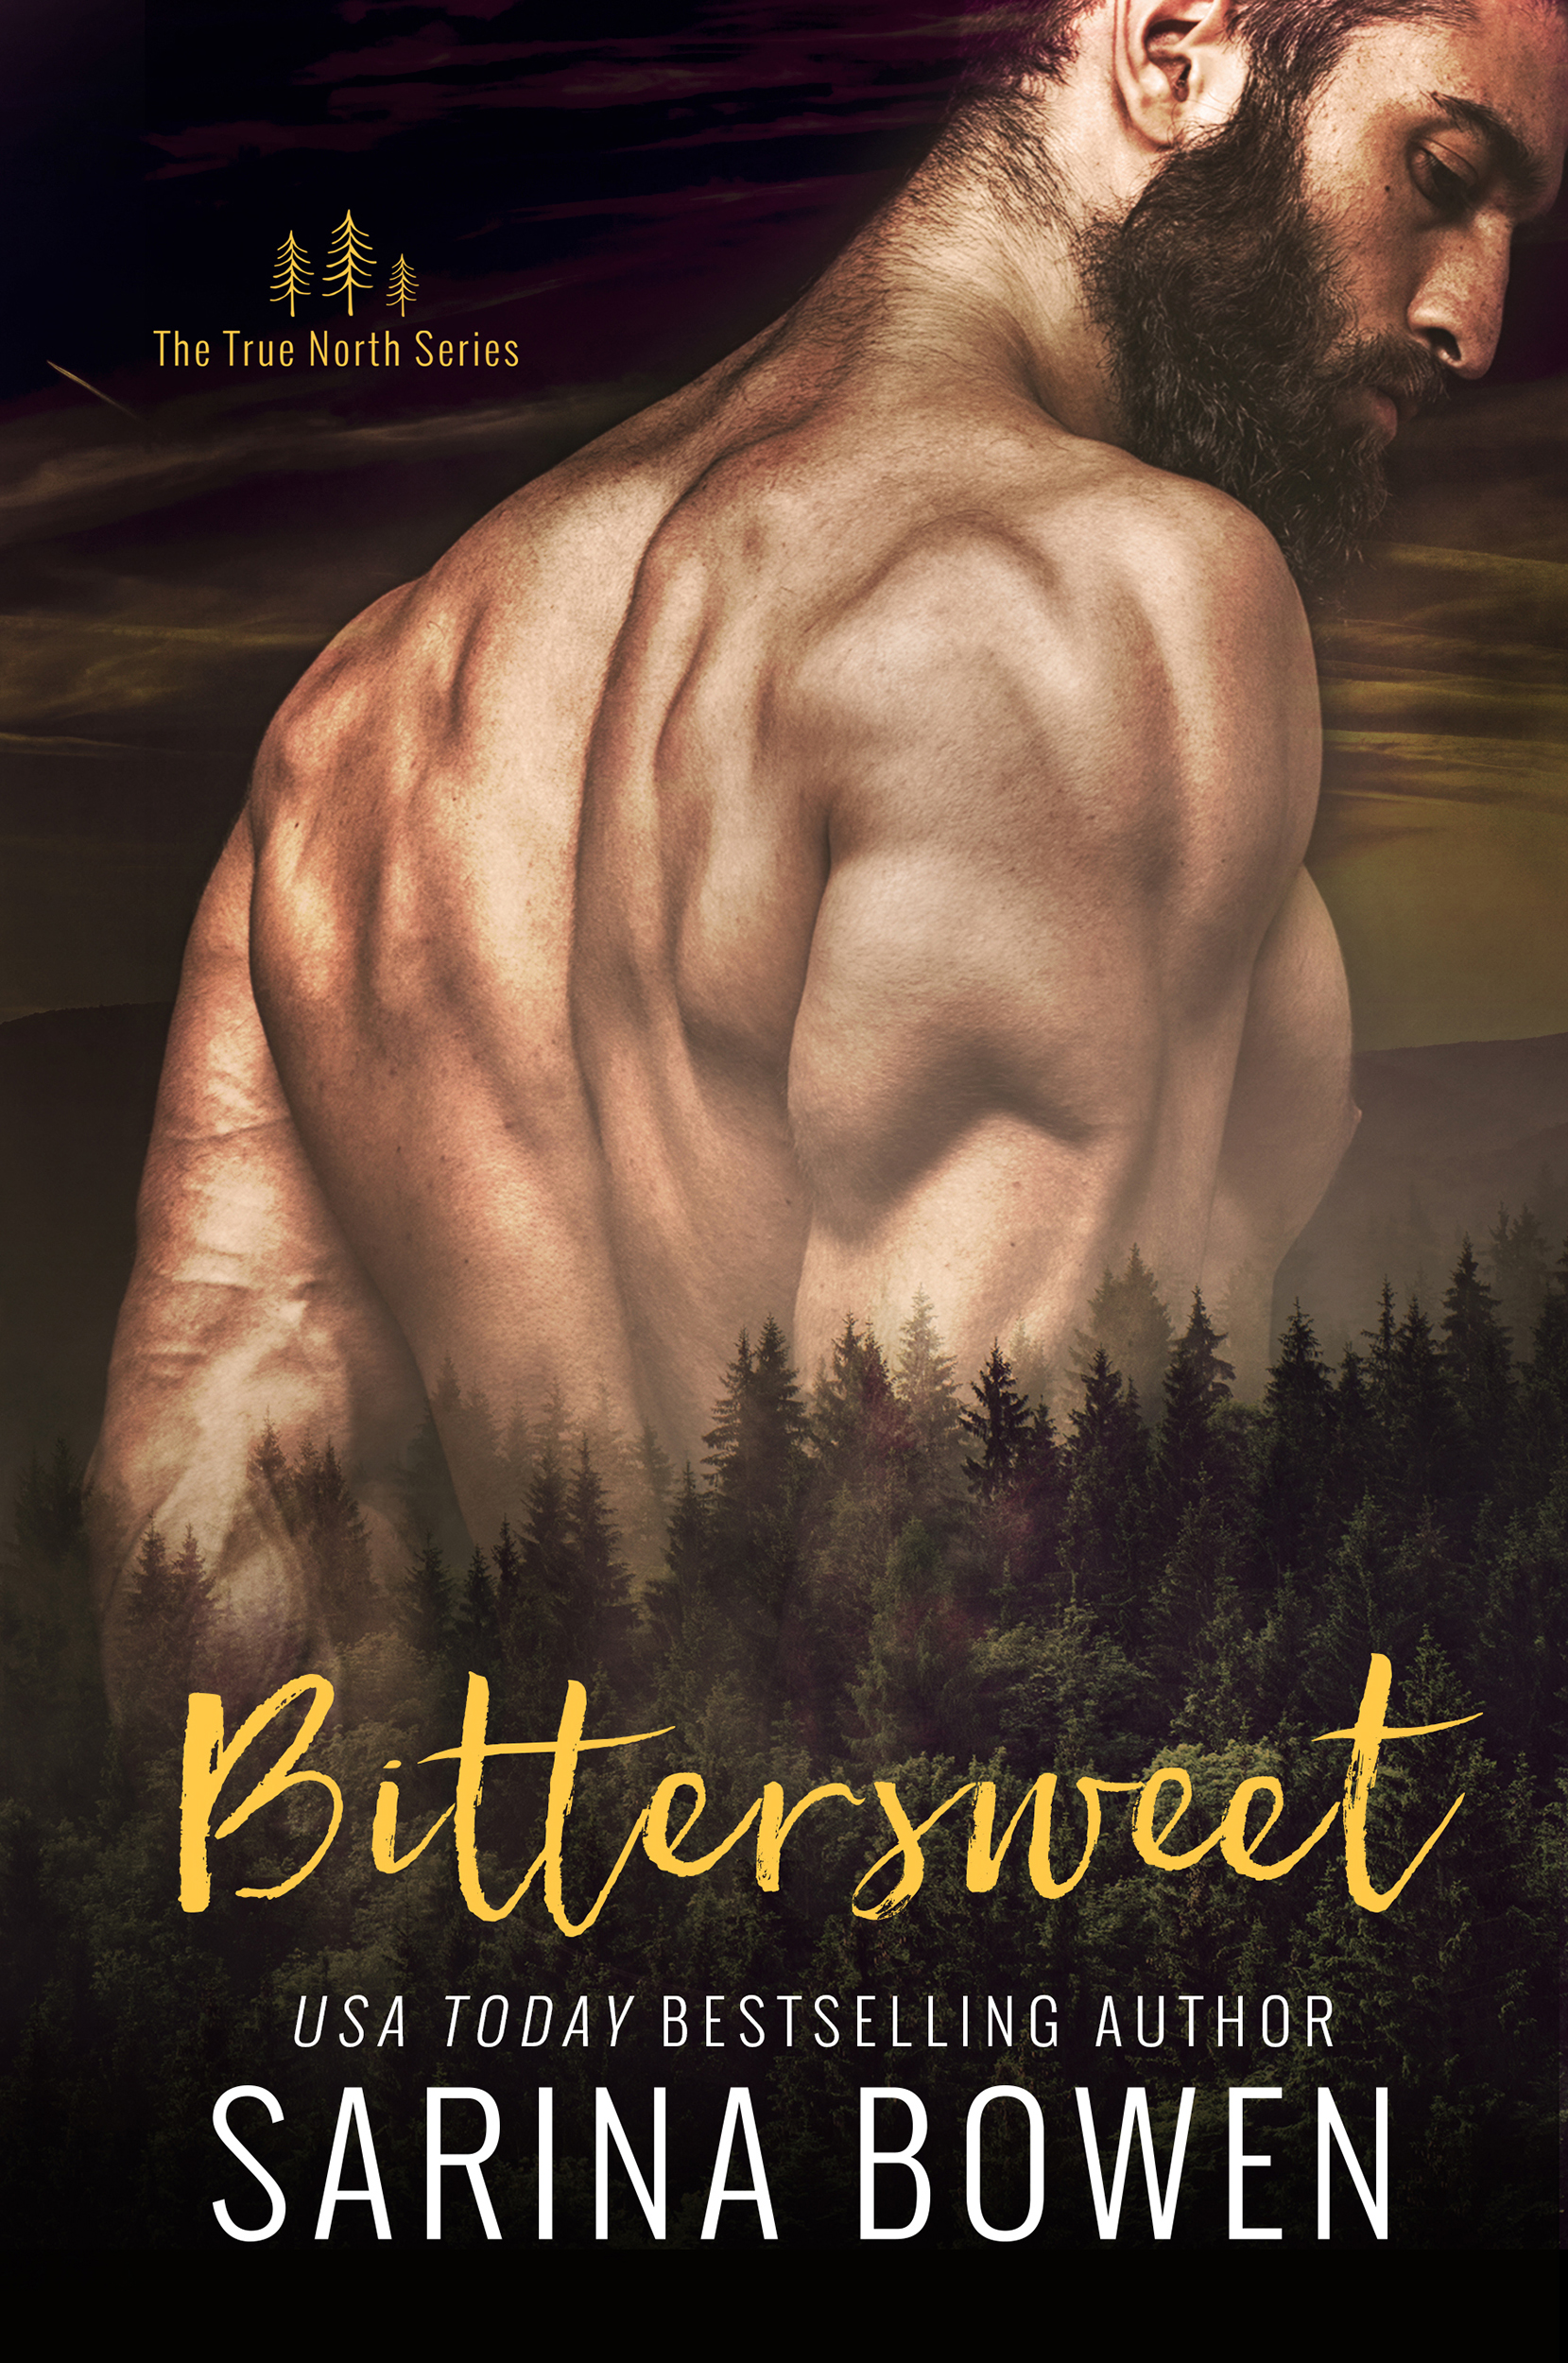 Bittersweet by Sarina Bowen Release Review